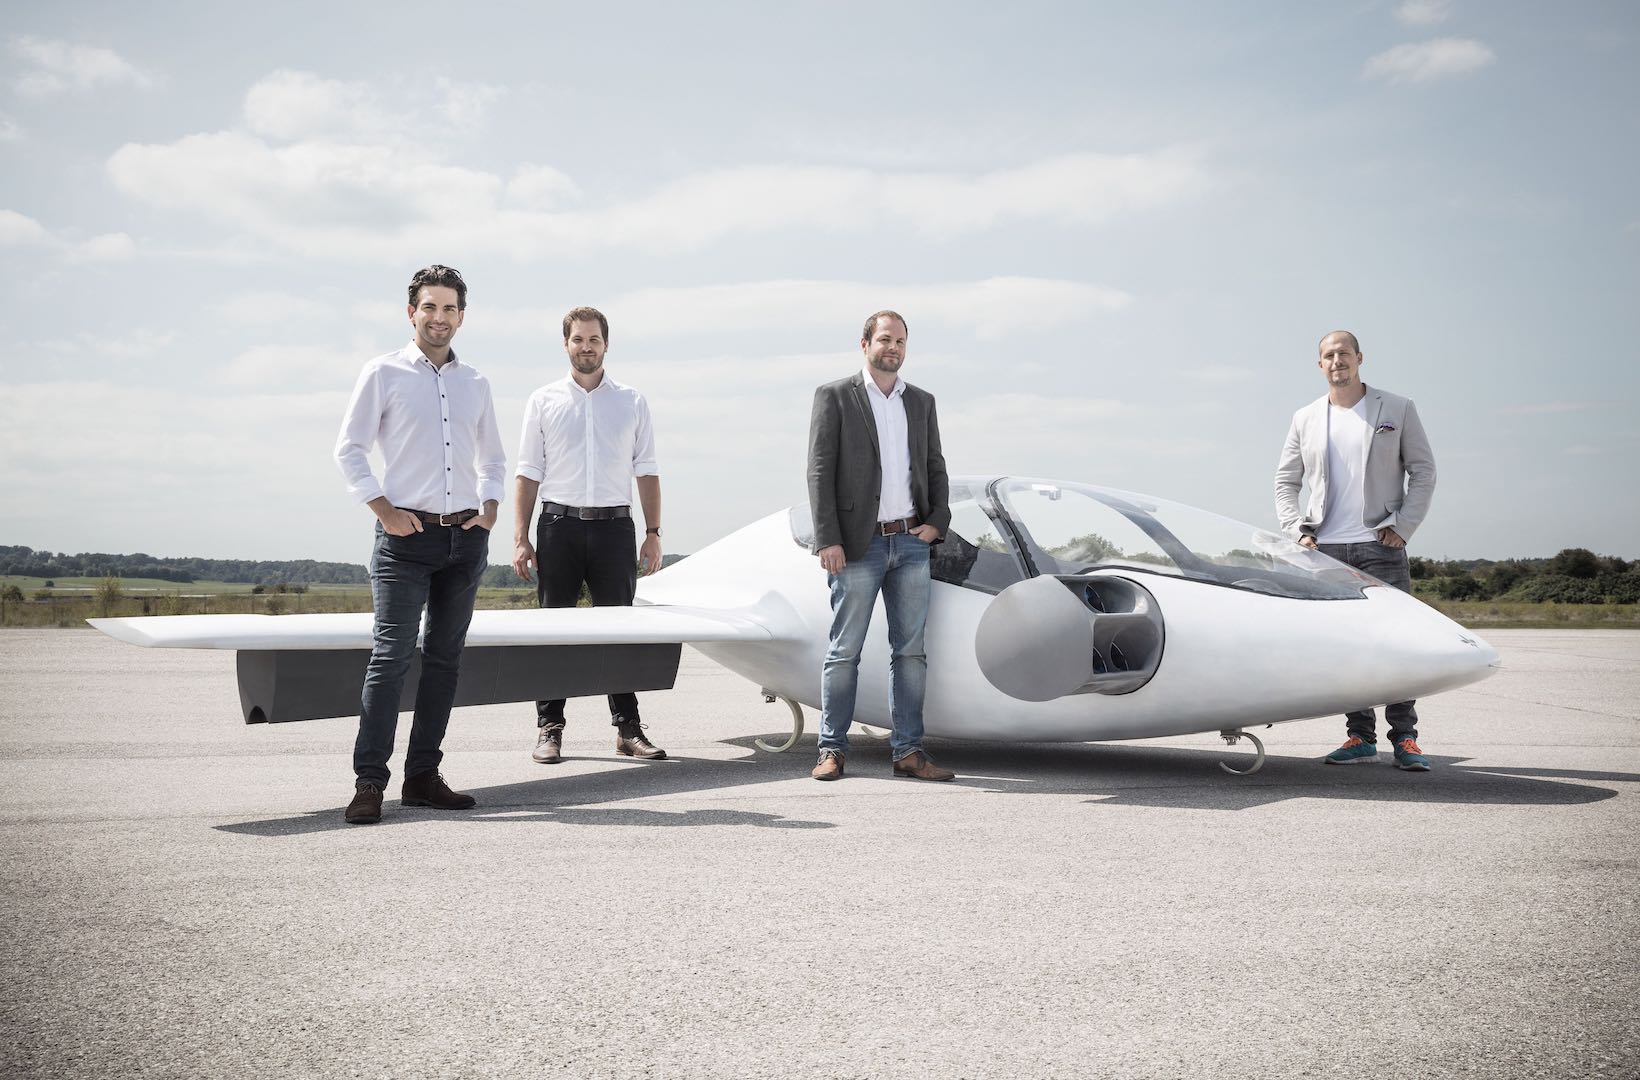 The four Lilium co-founders with the first generation (2-seats) aircraft. Source: Lilium